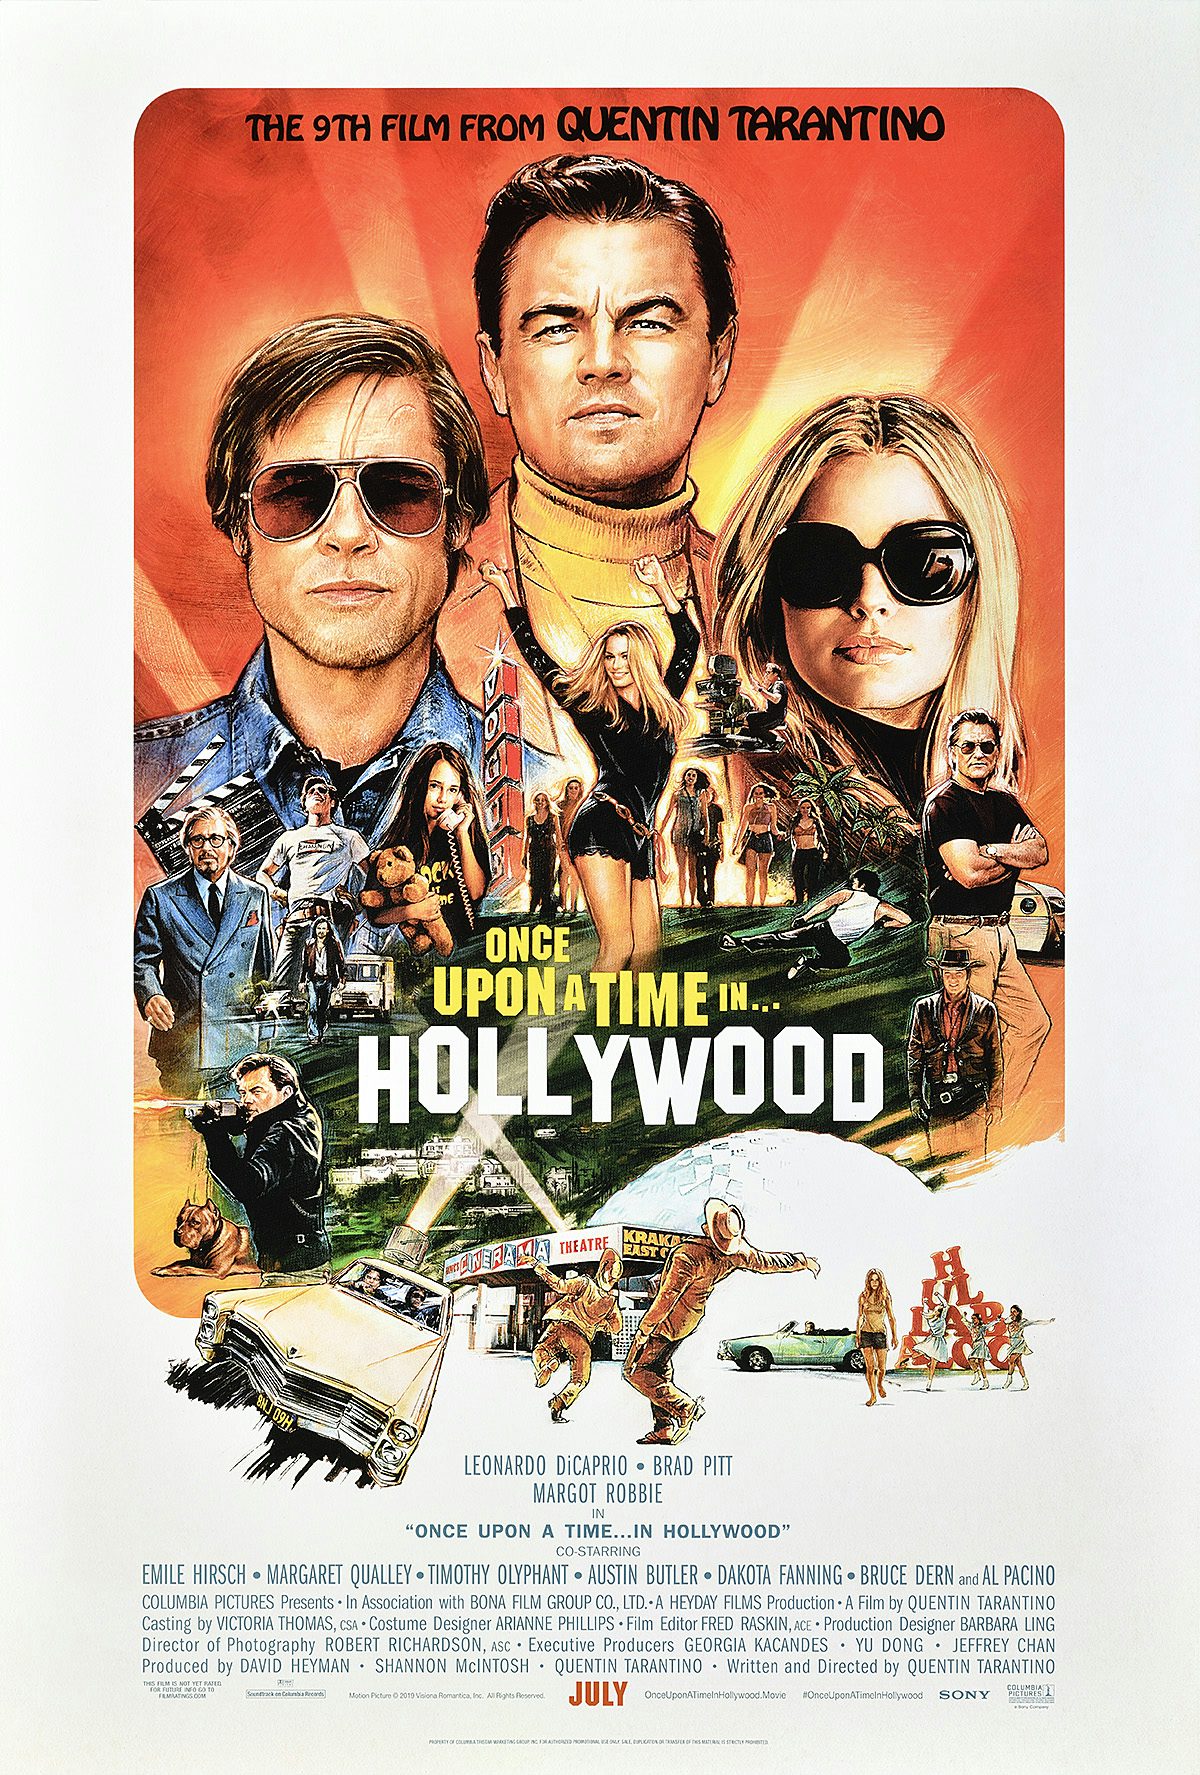 Poster design for Once Upon a Time in Hollywood, featuring illustrated portraits of the main cast members Leonardo Dicaprio, Brad Pitt and Margot Robbie in a vintage illustration style. Beneath them is a composite of illustrations referencing scenes and characters from the film, including a vintage car and action scenes